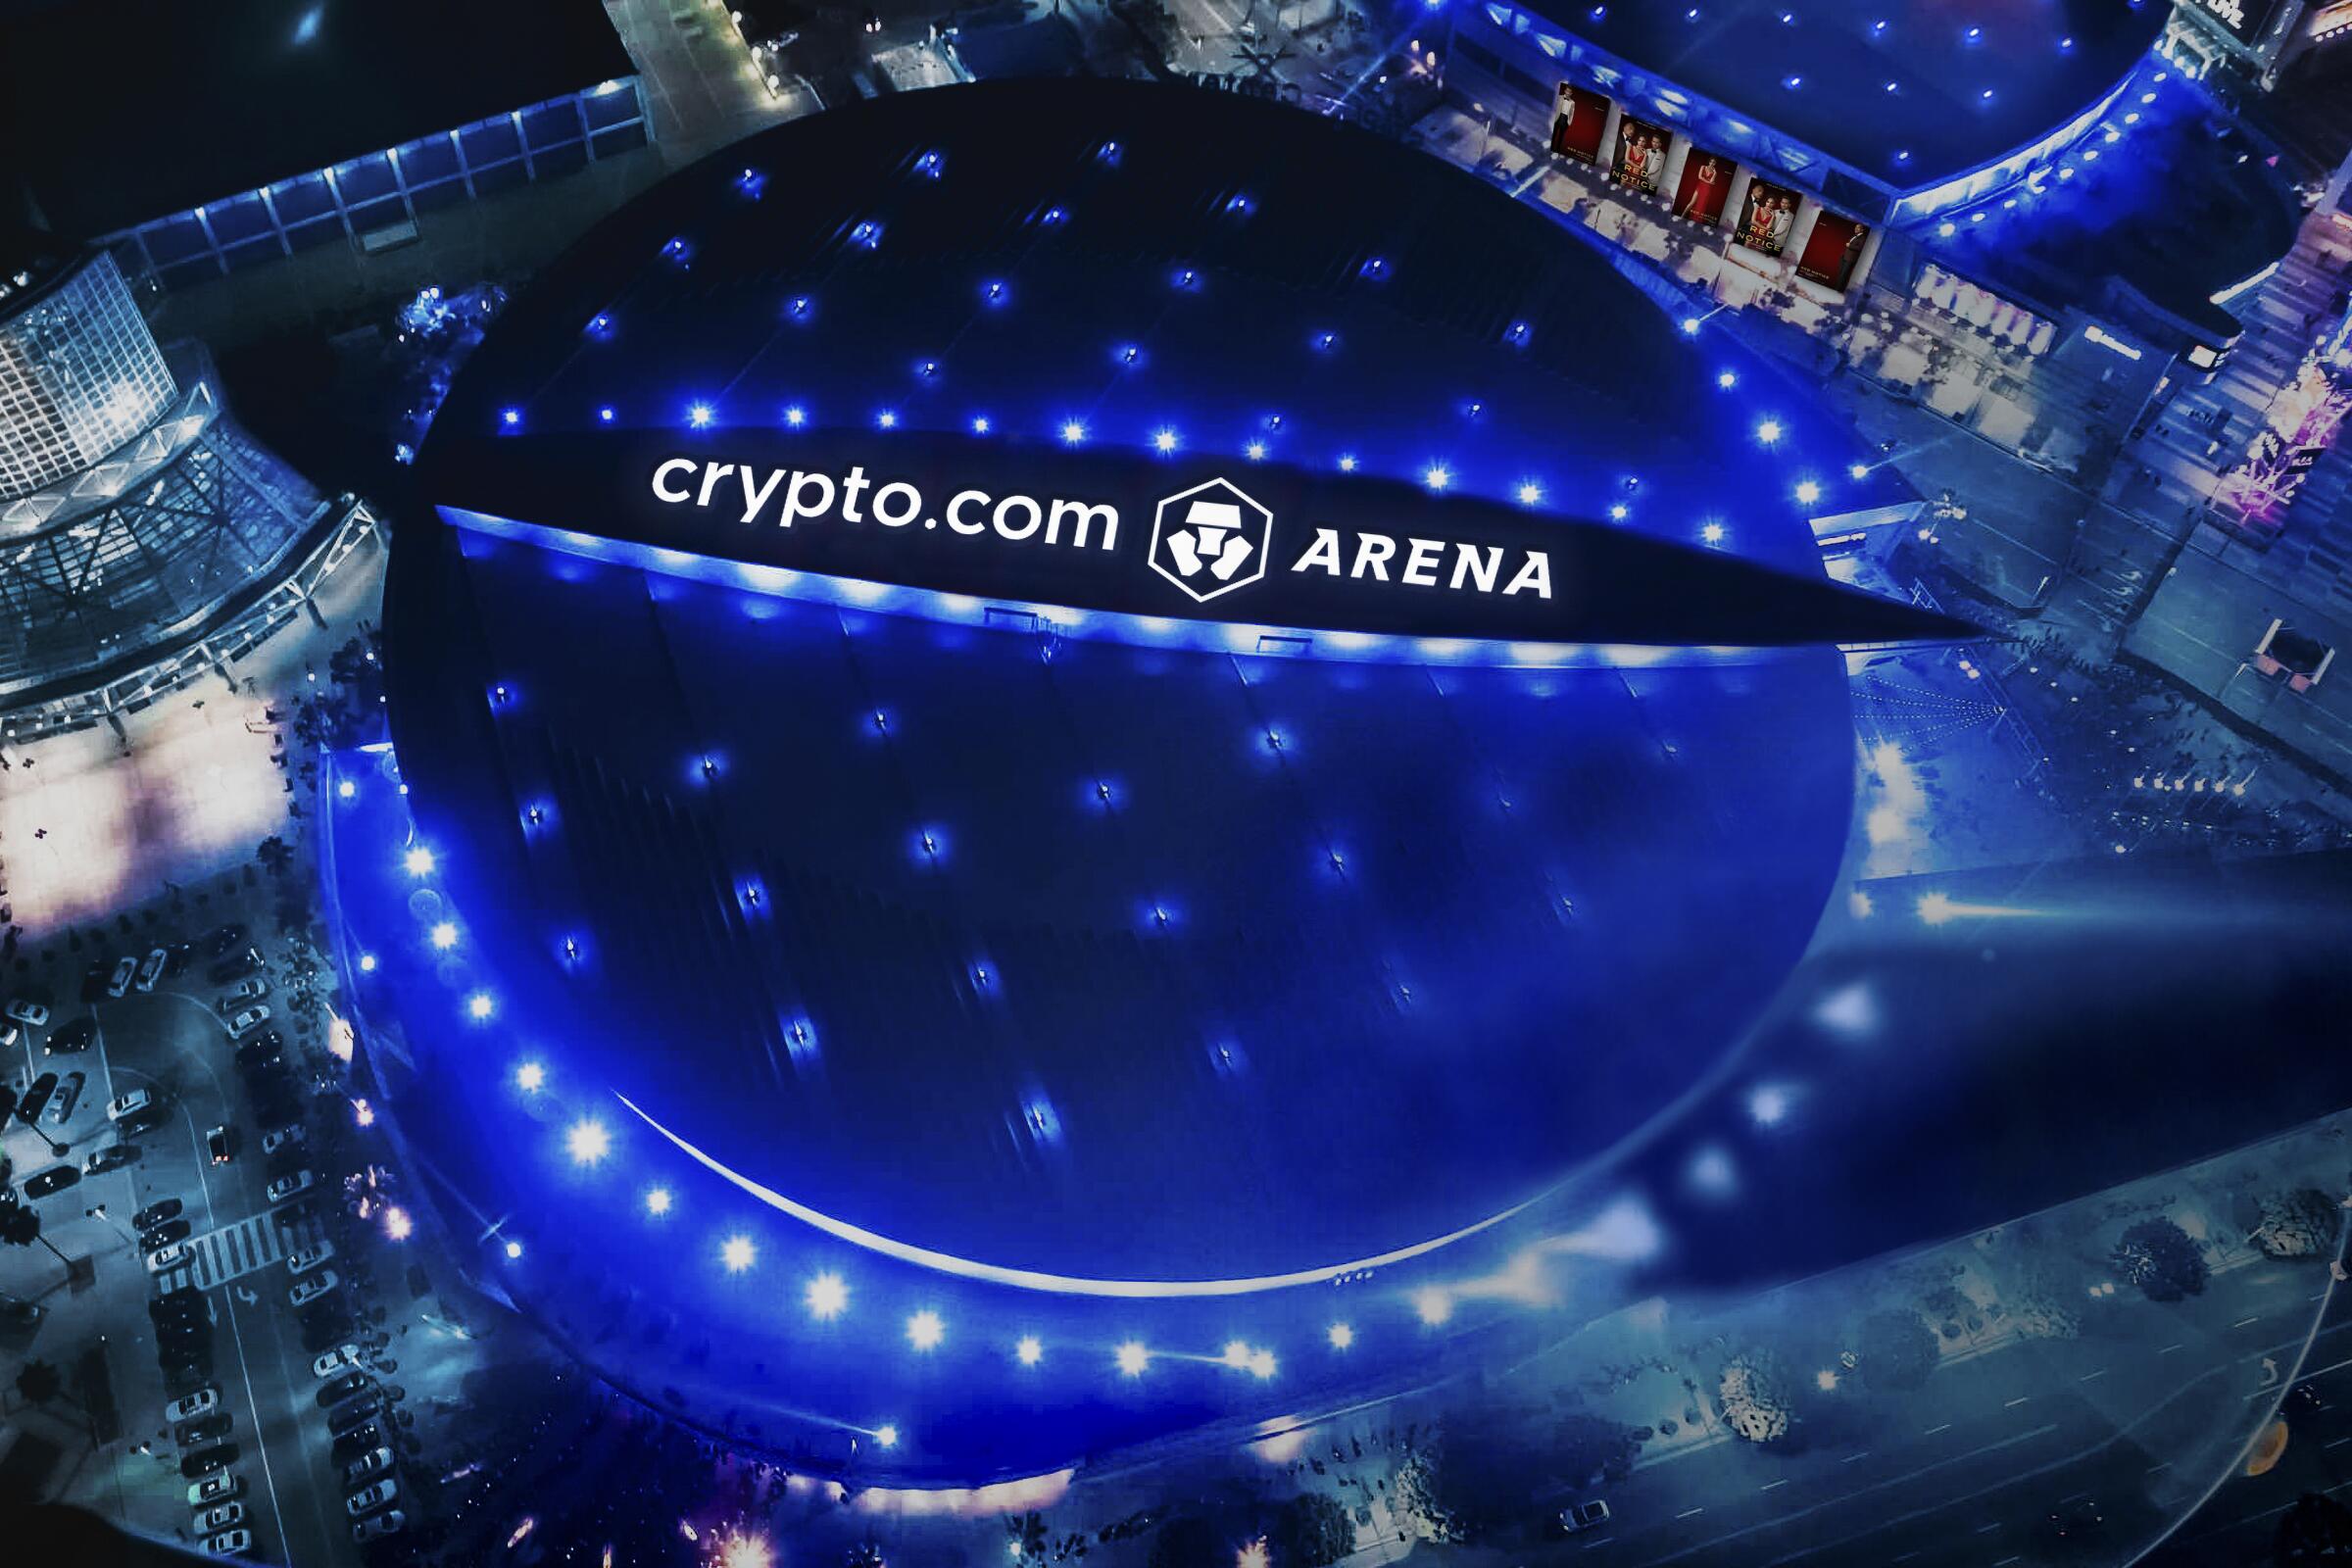 Is Crypto com Arena (aka #39 the Crypt #39 ) the best arena name? Los